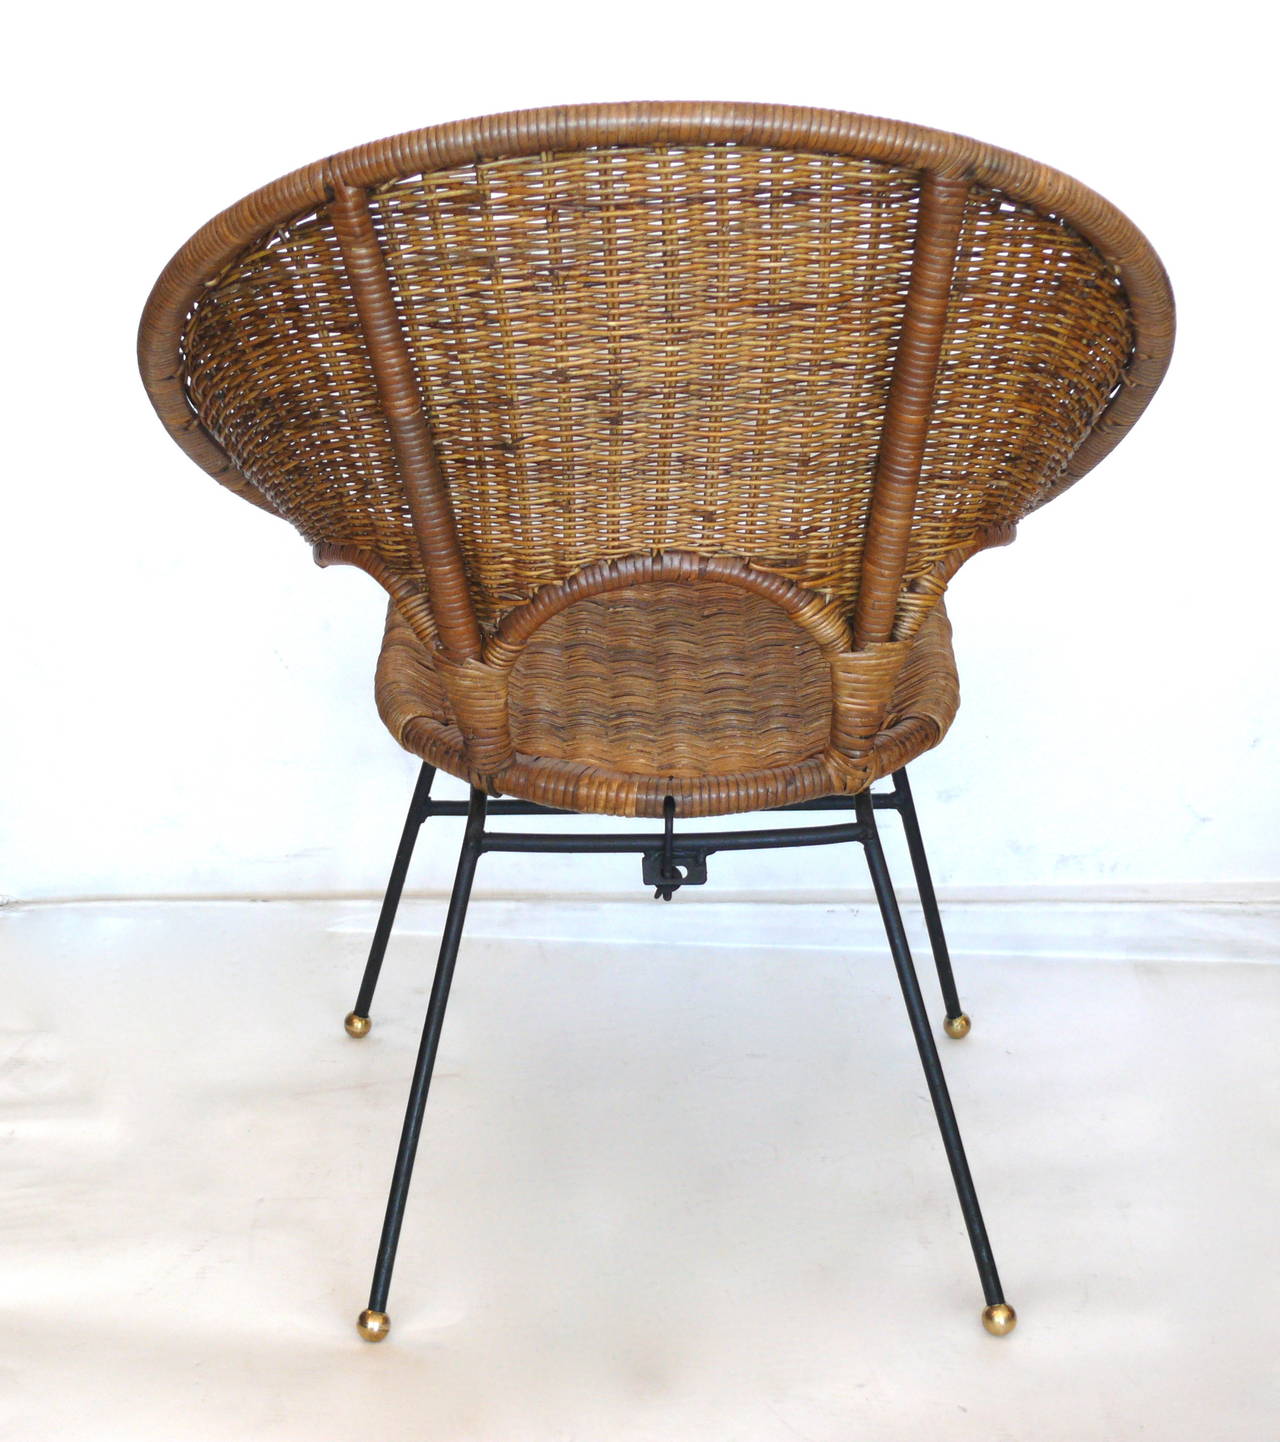 American Sculptural Wicker and Rattan Chairs